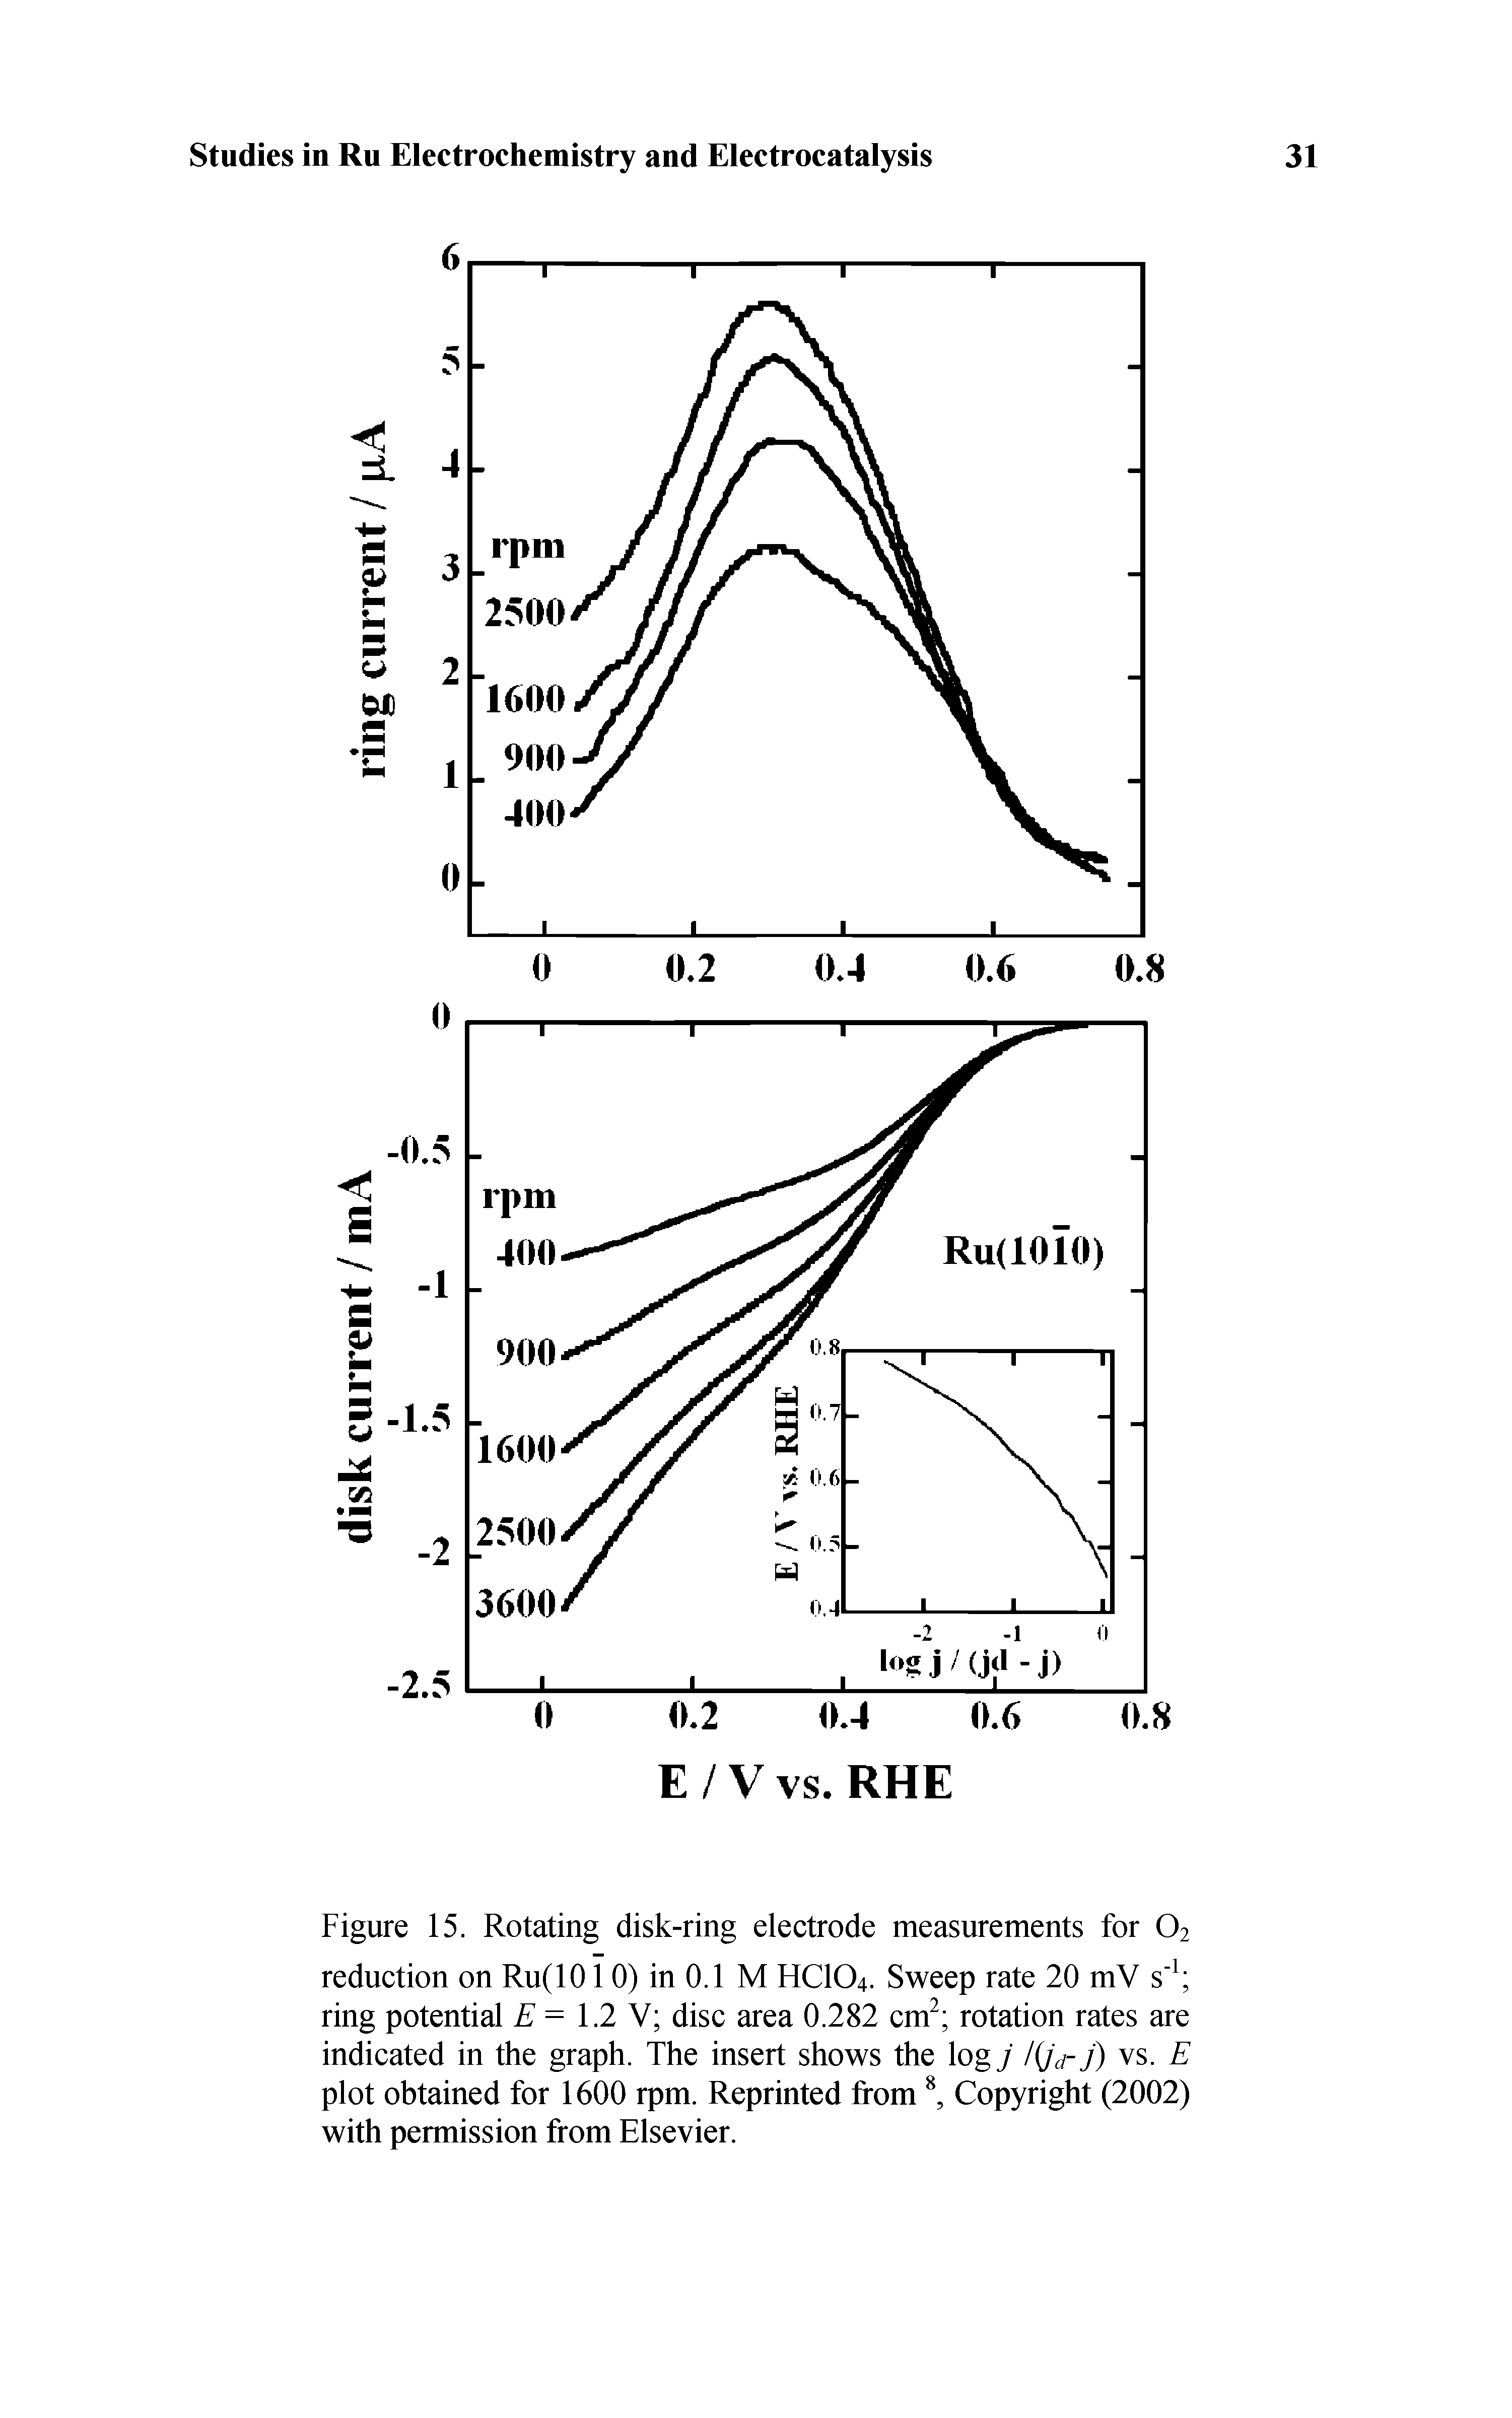 Figure 15. Rotating disk-ring electrode measurements for O2 reduction on Ru(1010) in 0.1 M HCIO4. Sweep rate 20 mV s ring potential E = 1.2 V disc area 0.282 cm rotation rates are indicated in the graph. The insert shows the logy Kjd-j) vs. E plot obtained for 1600 rpm. Reprinted from Copyright (2002) with permission from Elsevier.